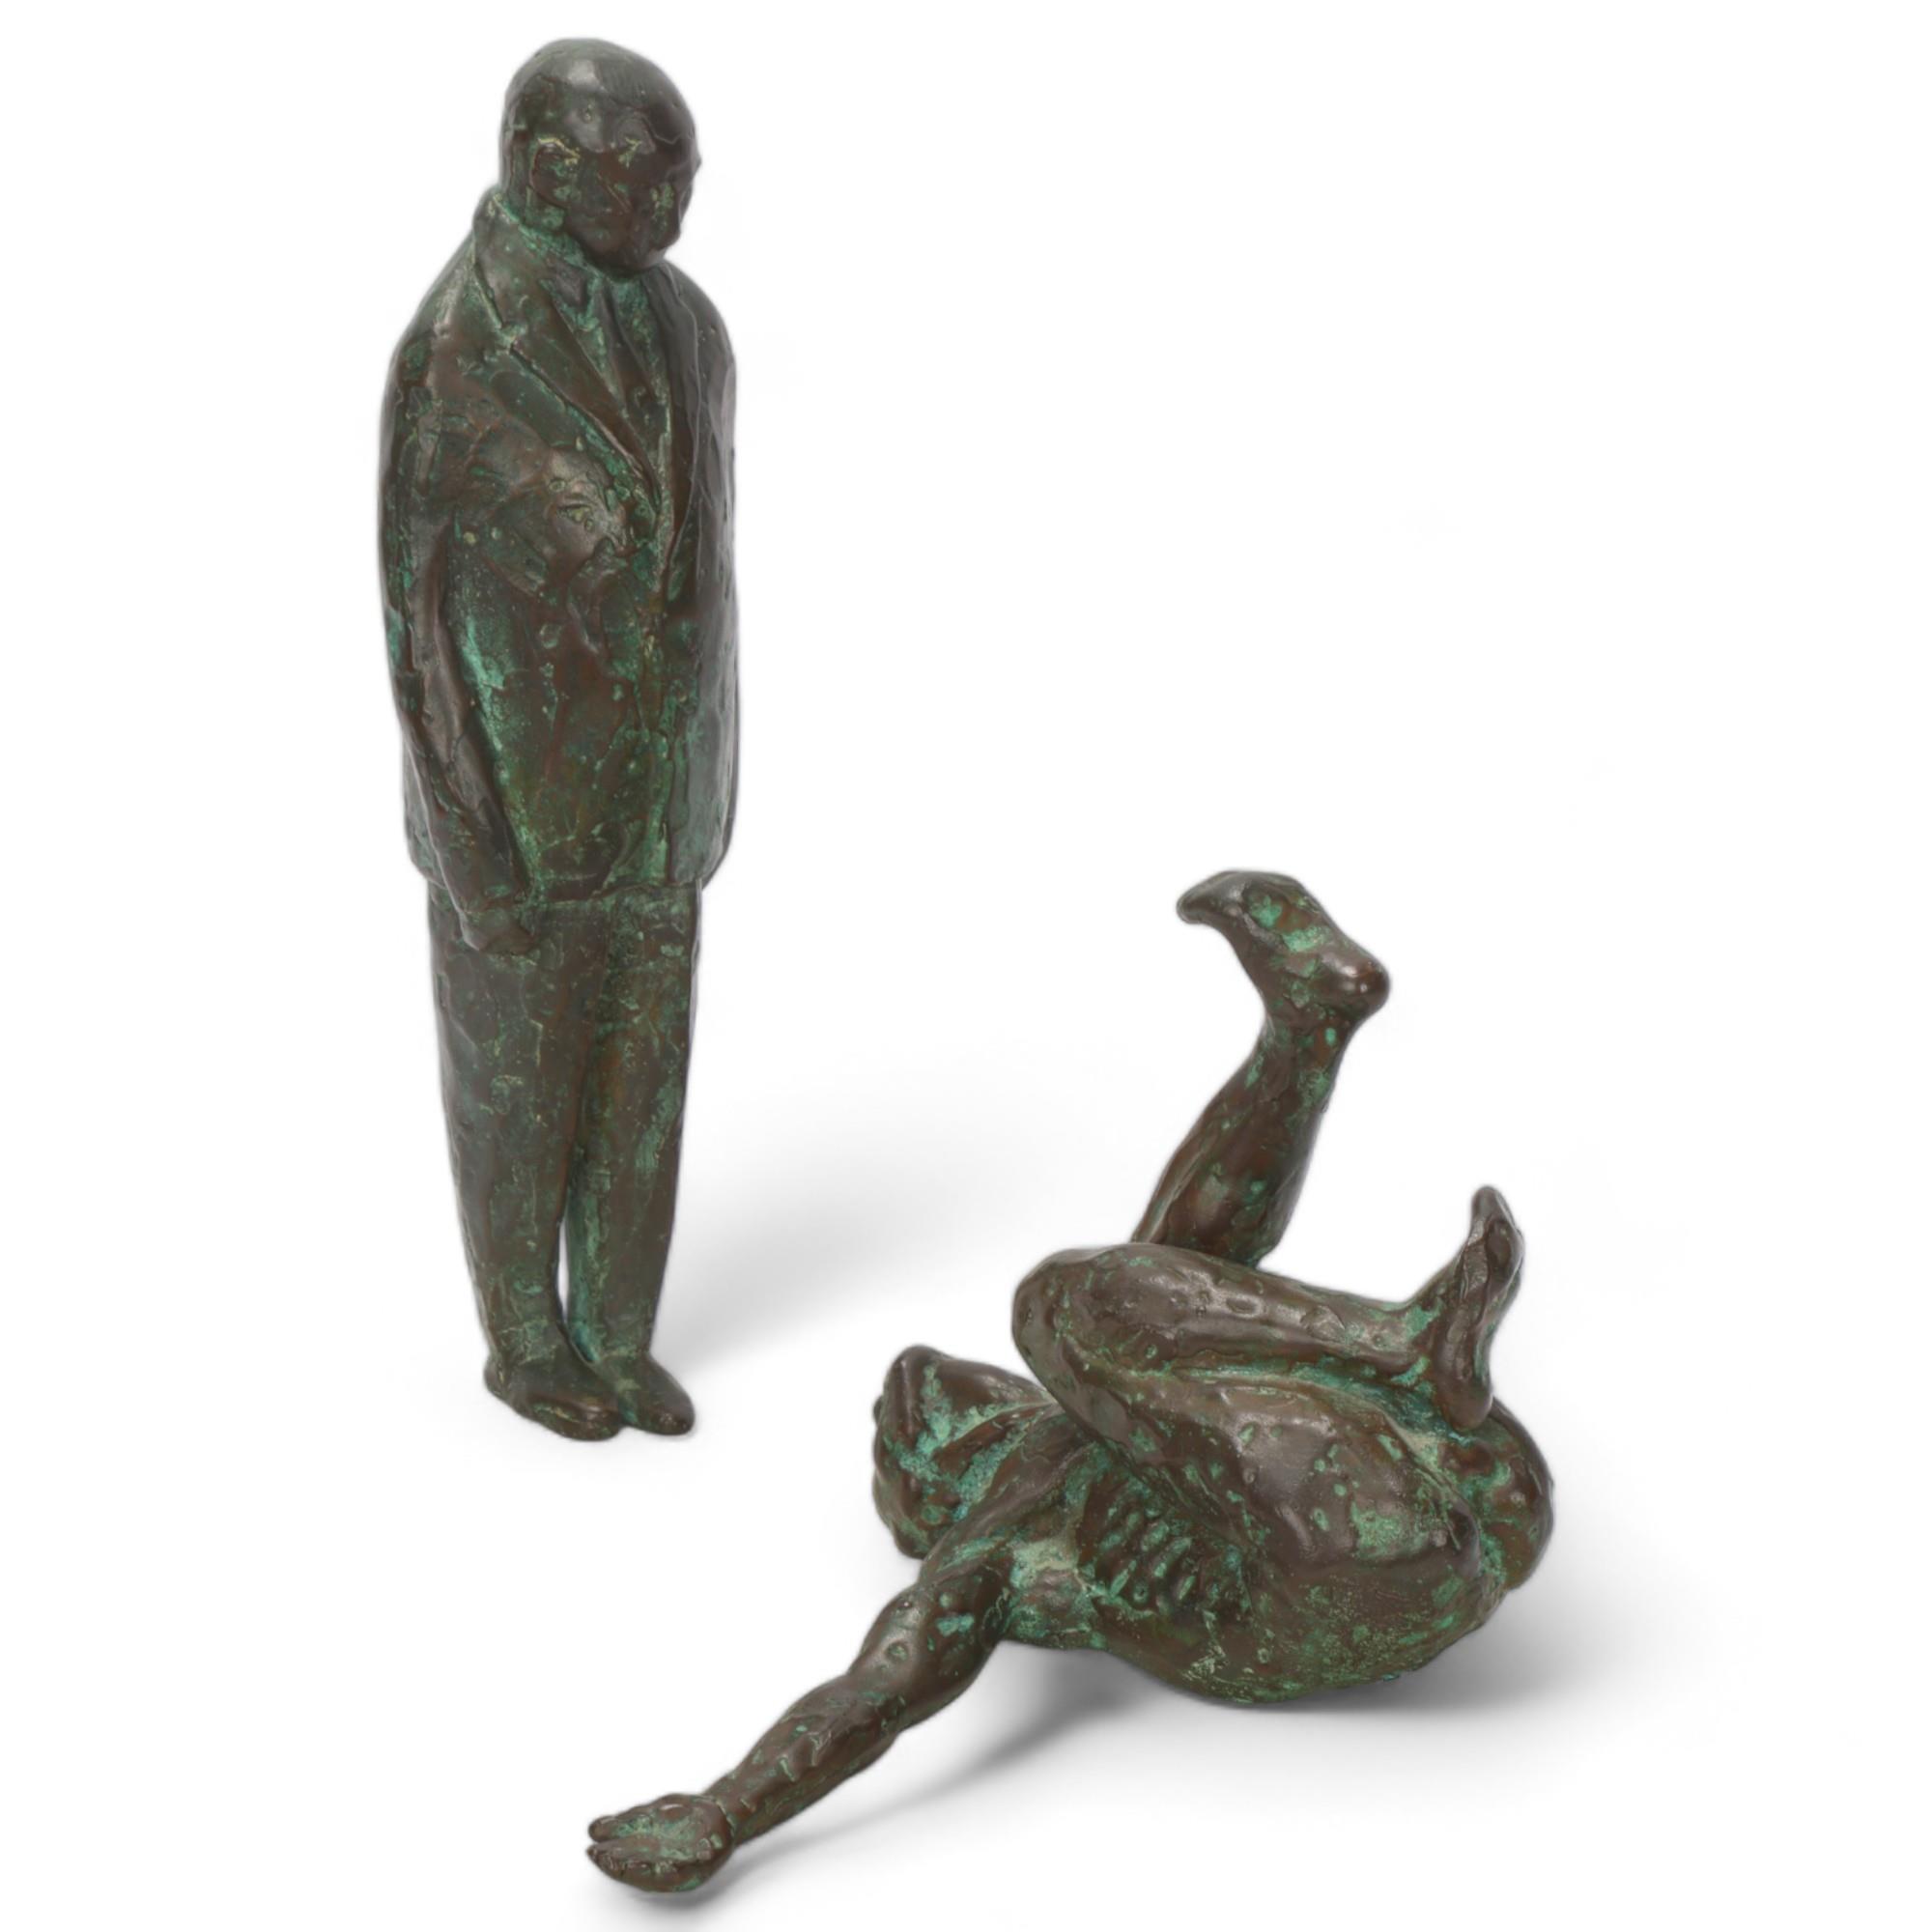 MAUREEN LANGLEY (b.1931), a bronze figure of a man prostrate in front of a suited figure on a marble